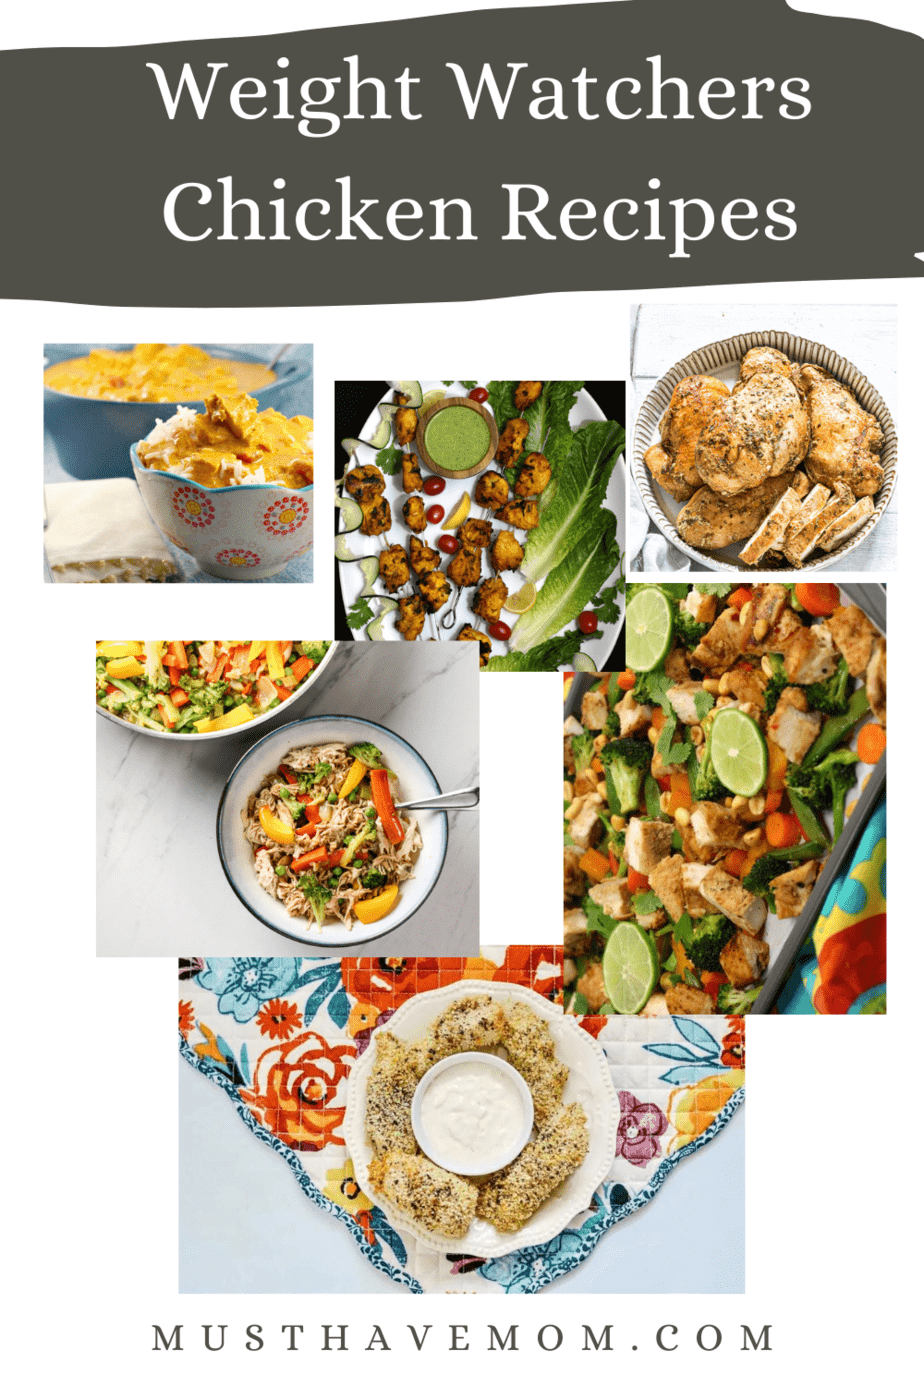 Looking to lose weight or just eat healthy? These Weight Watchers Chicken Recipes are so delicious you will forget you are dieting. #MustHaveMom #WeightWatchers #chicken #dinner